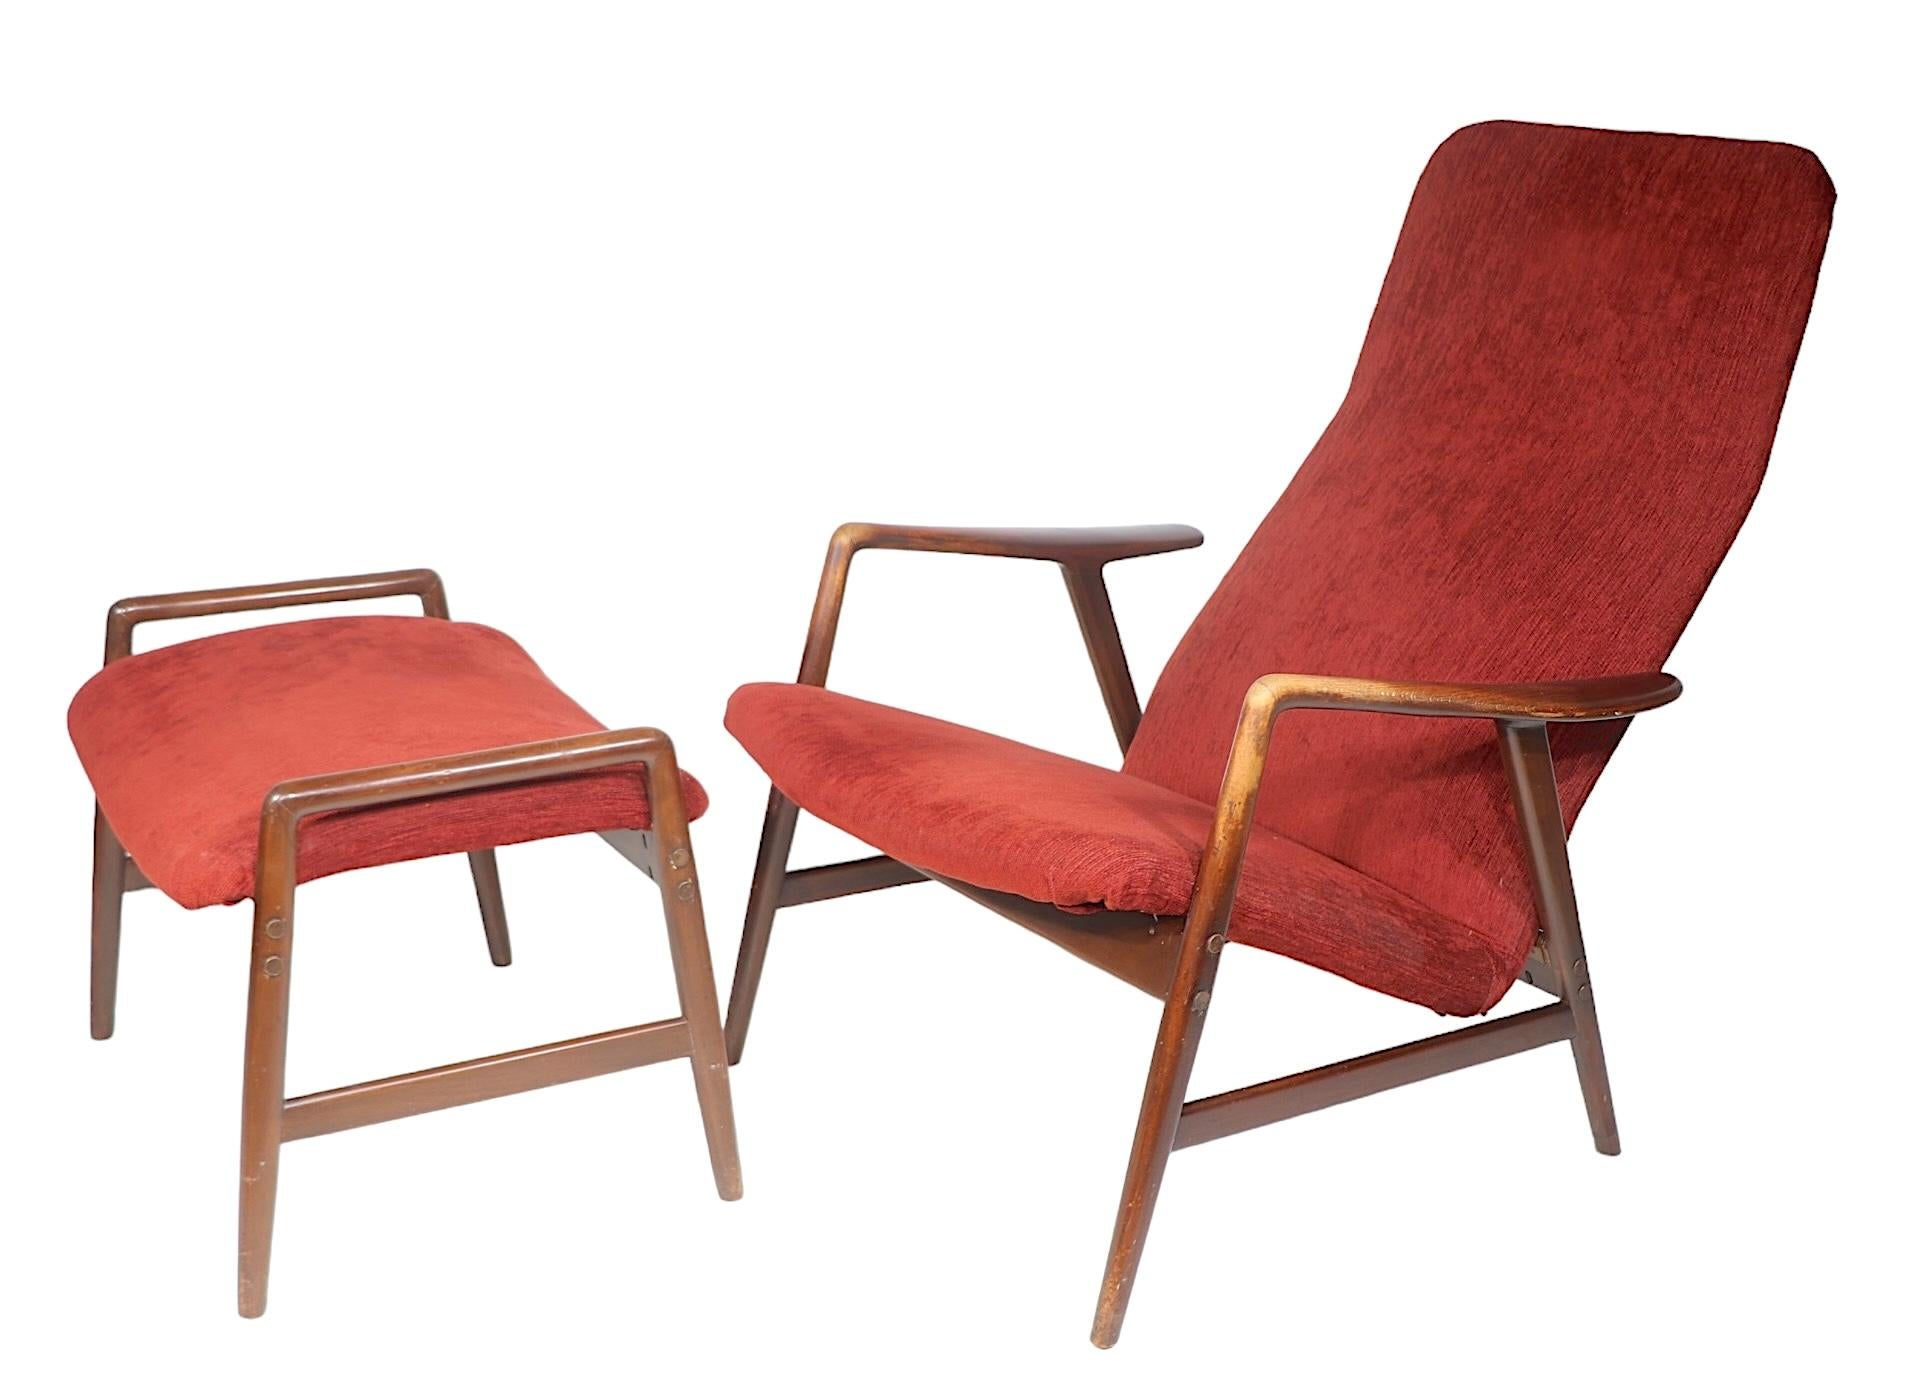 Chic architectural Mid Century  lounge chair and ottoman designed by Alf Svensson for Fritz Hansen, made in Denmark circa 1960's. This example is in very good, clean, ready to use condition, it is currently in  a later, but not new, dark finish